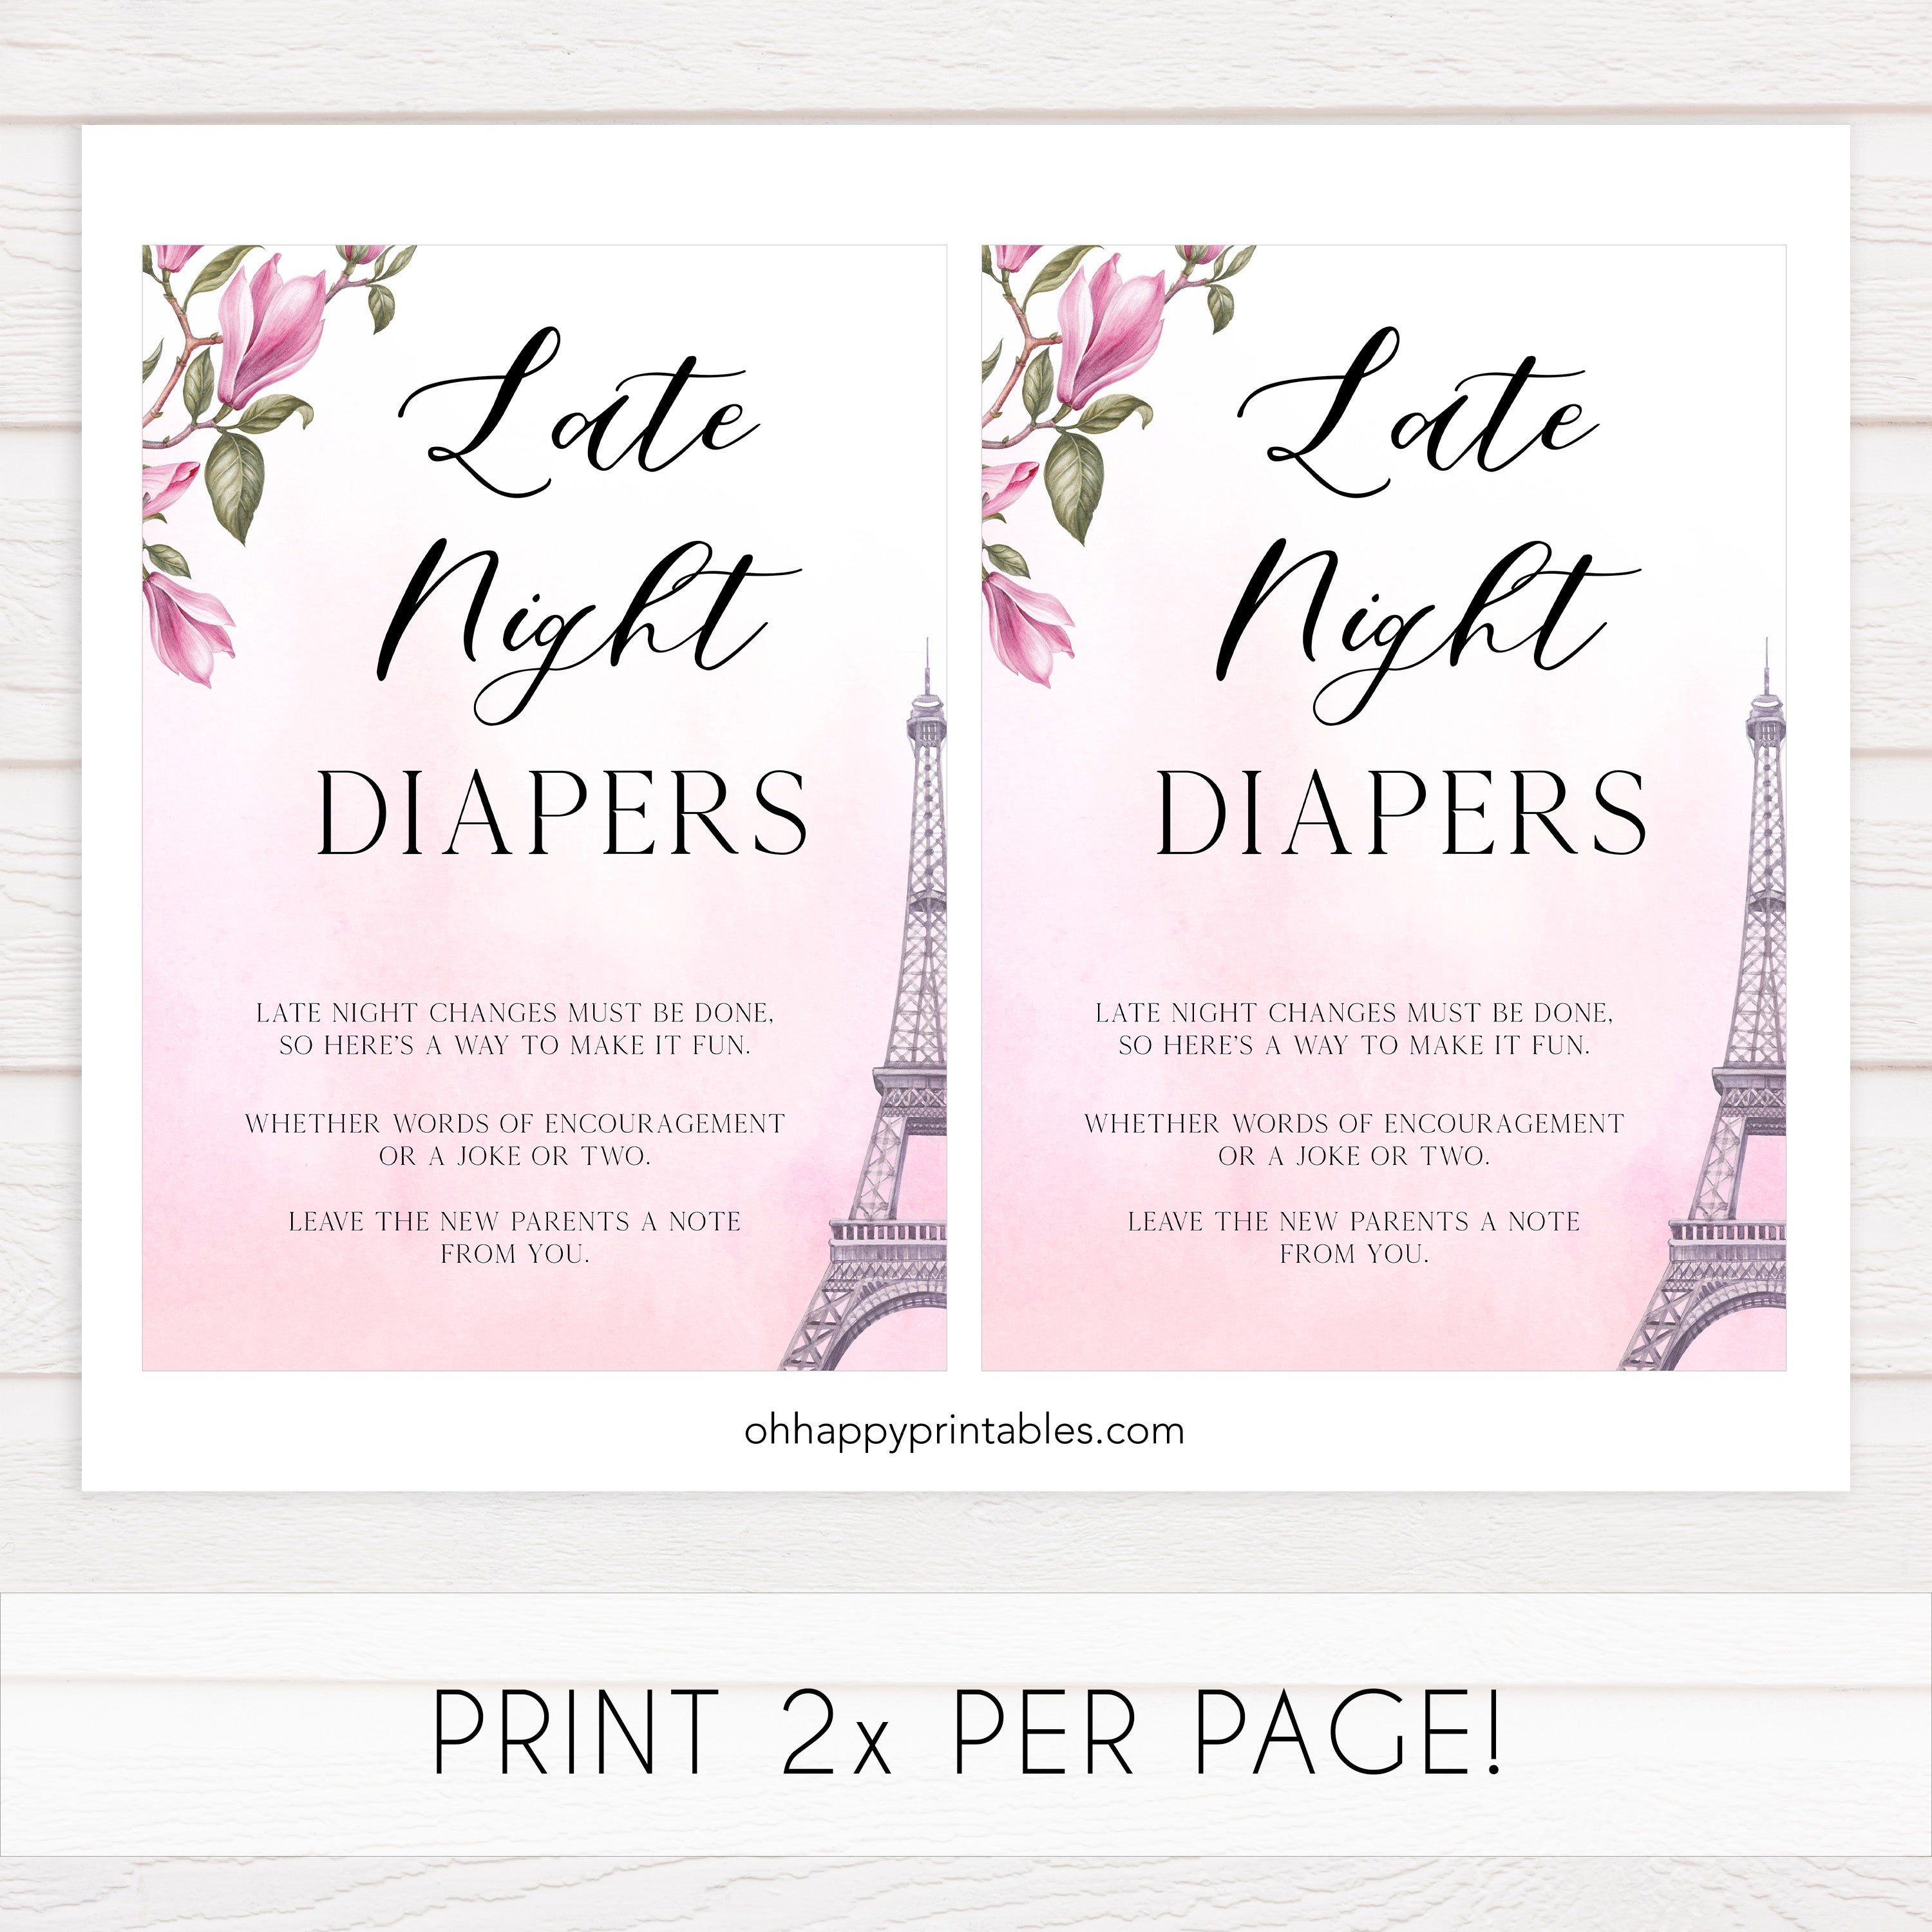 late night diapers game, Paris baby shower games, printable baby shower games, Parisian baby shower games, fun baby shower games